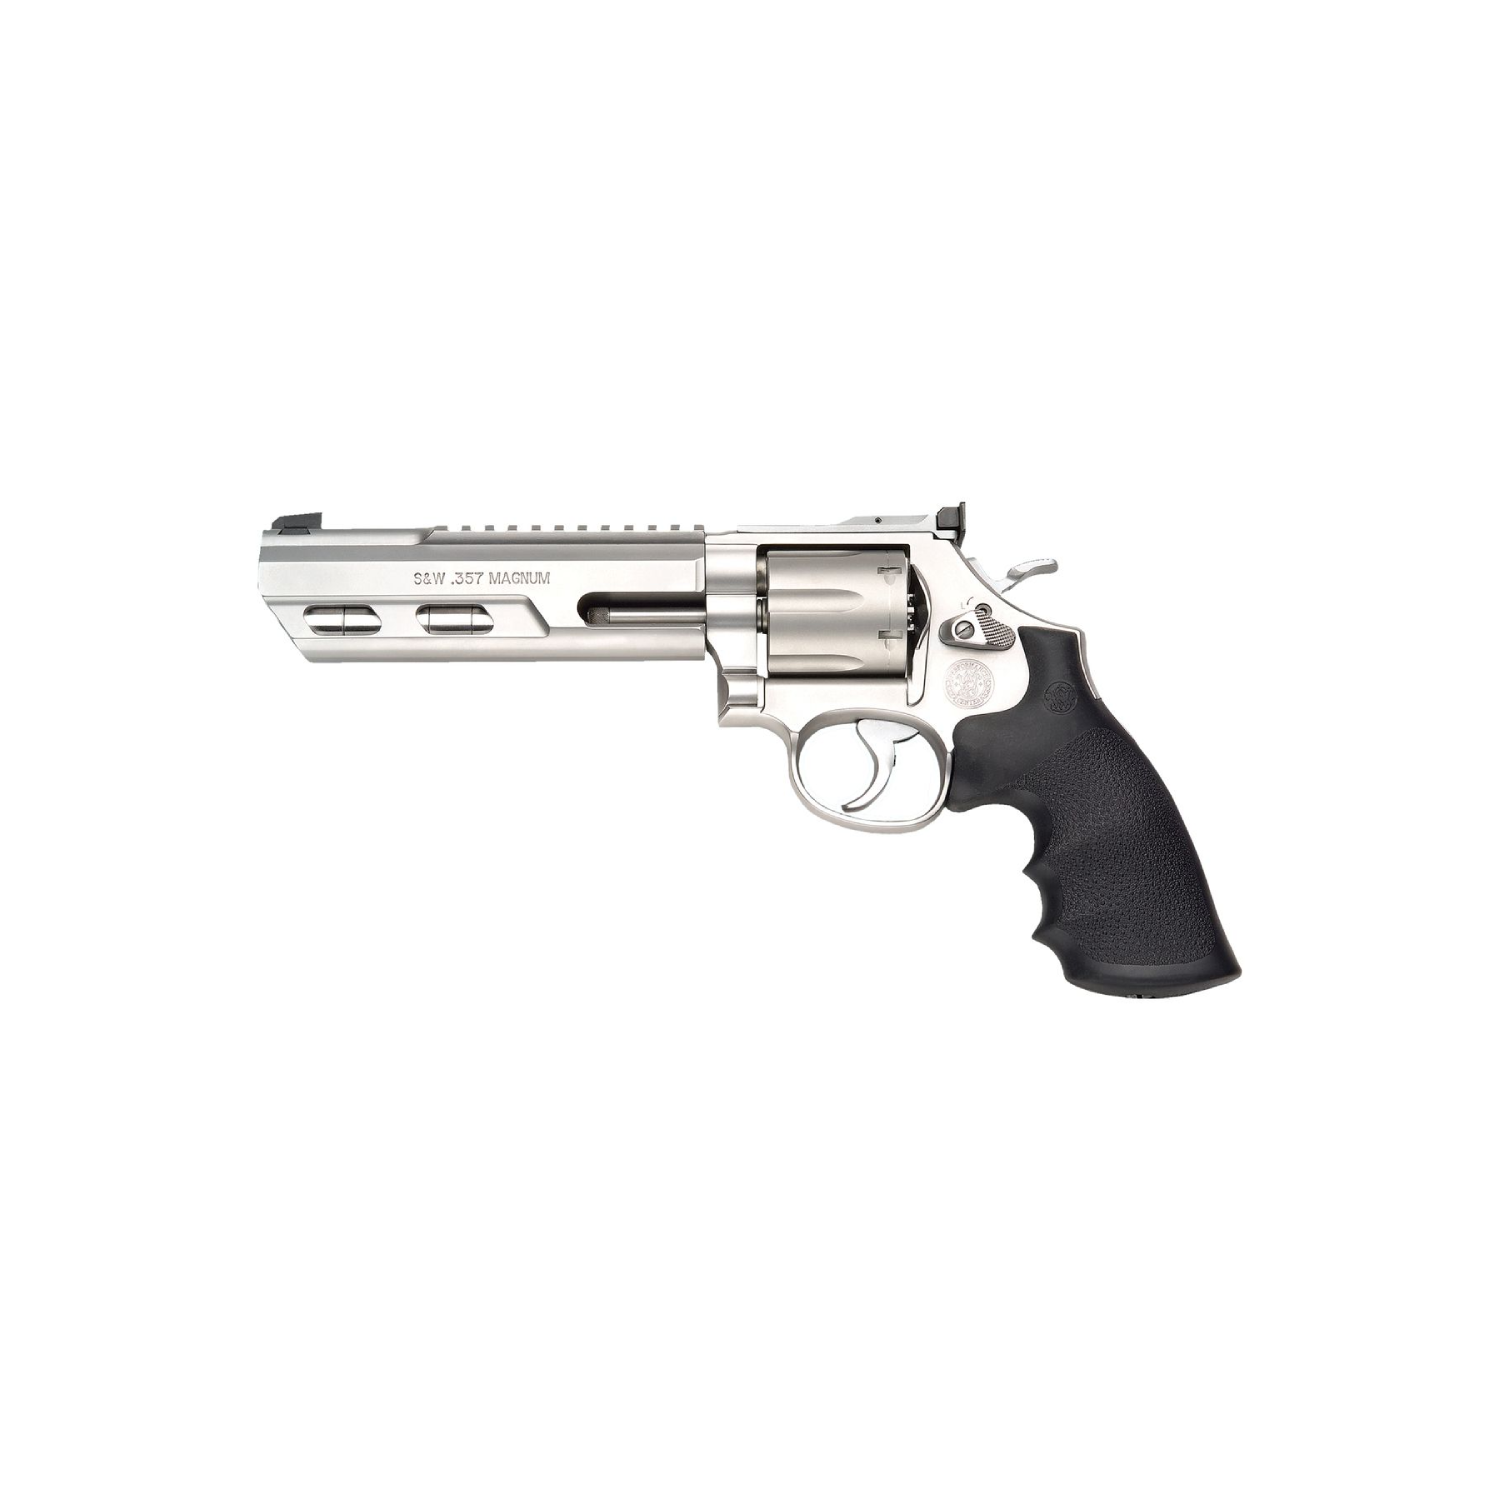 Smith & Wesson Mod. 686 Competitor .357 Magnum